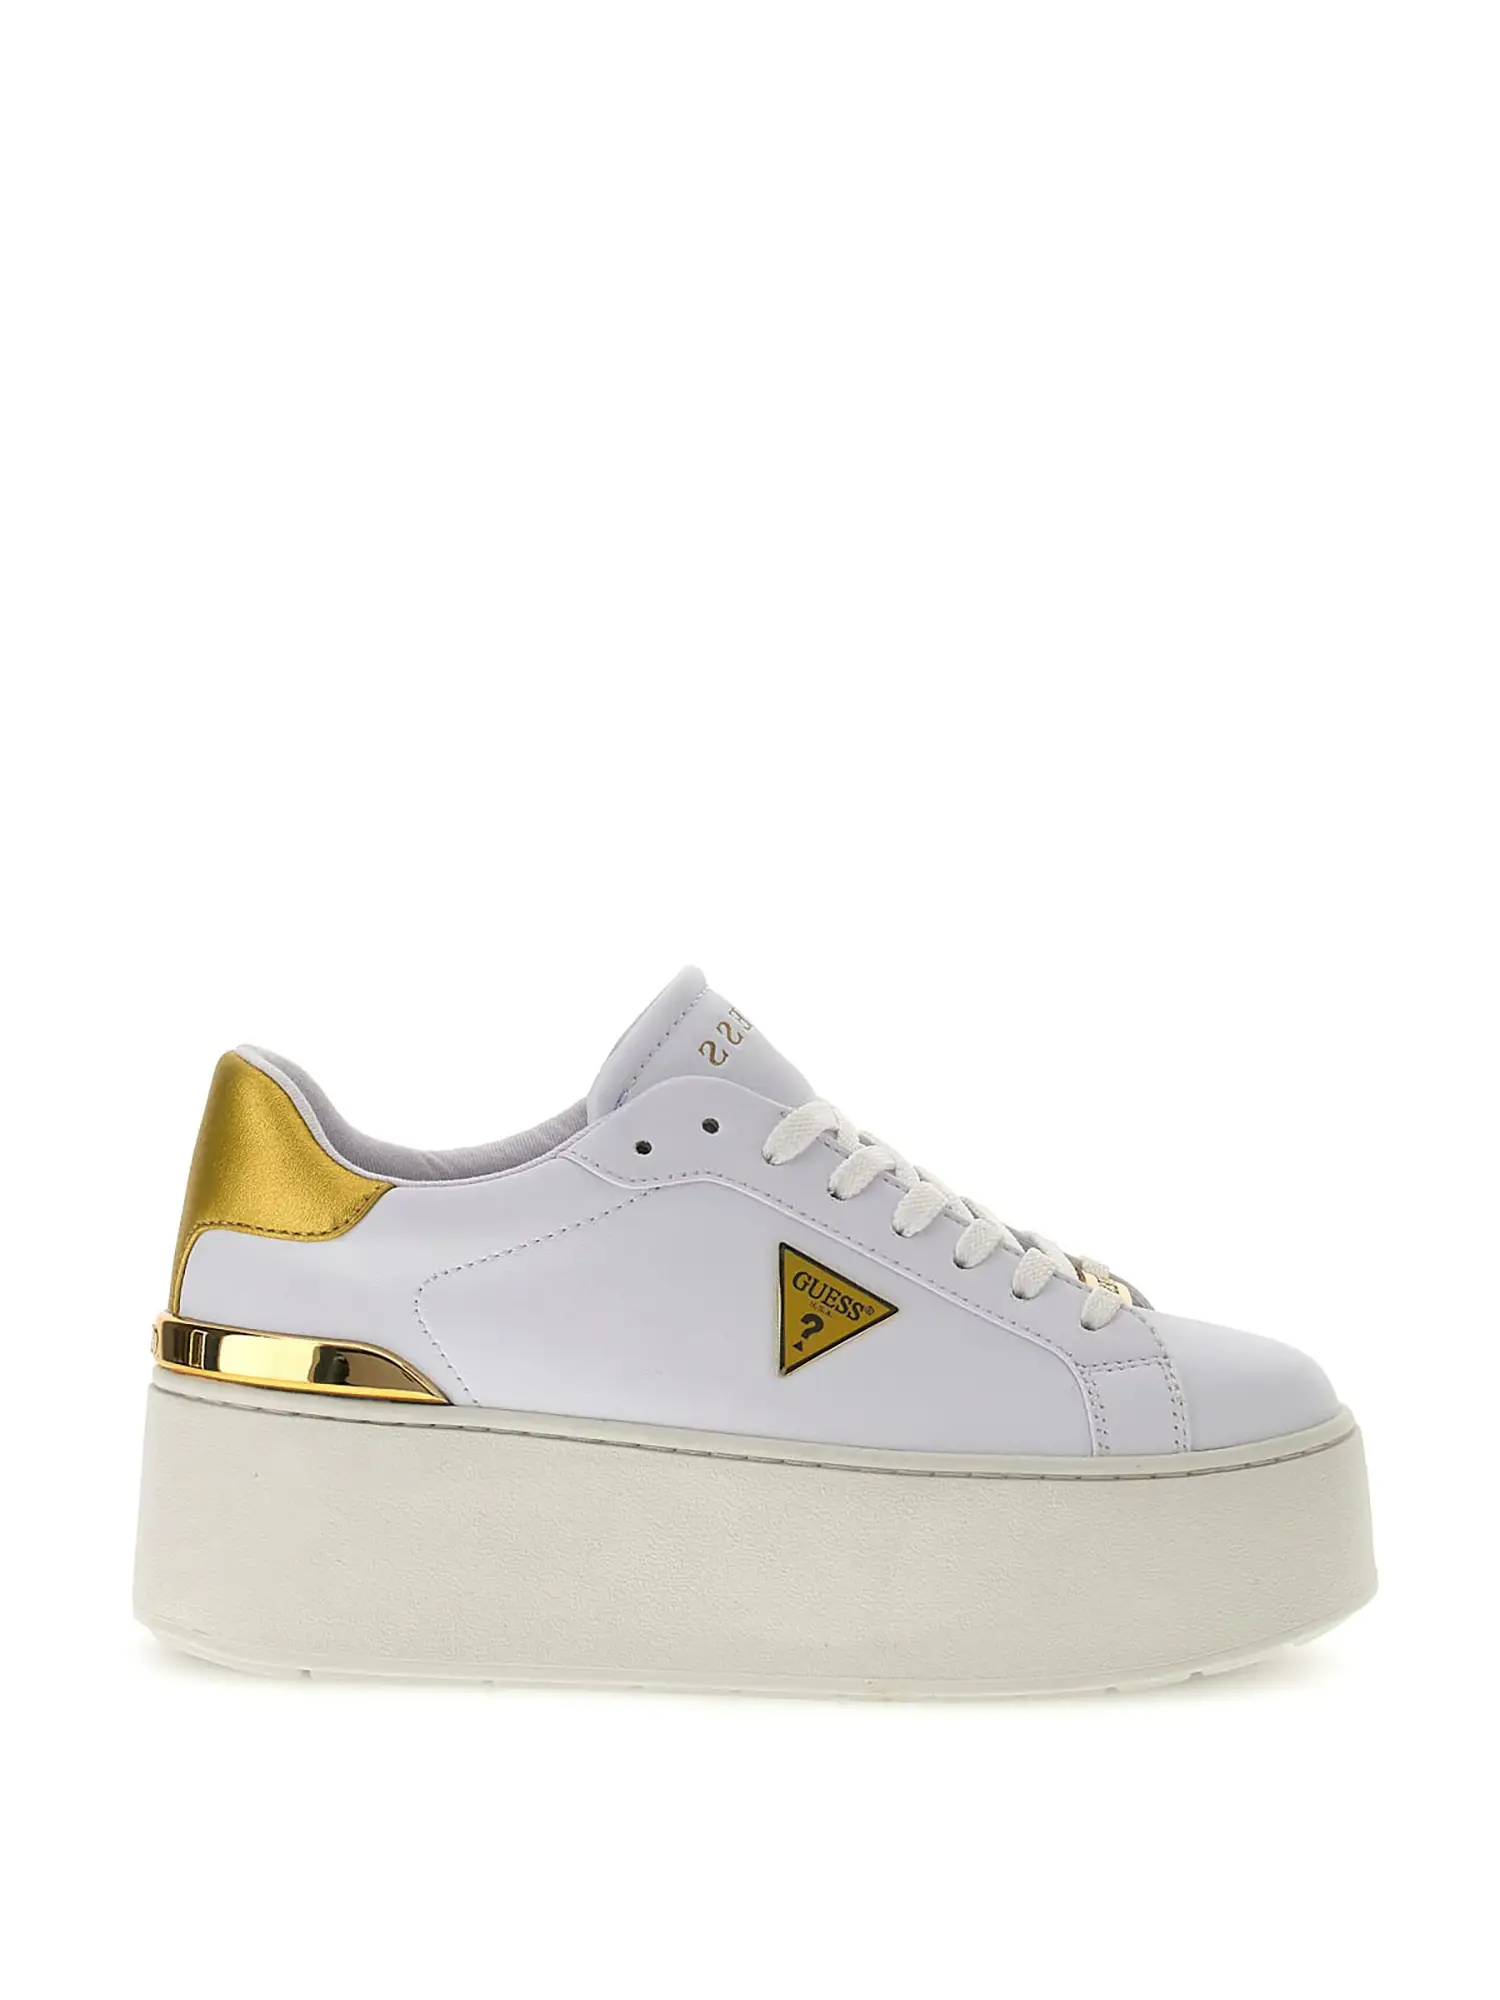 SNEAKERS DONNA - GUESS - FLPWLL LEL12 - BIANCO/ORO, 40